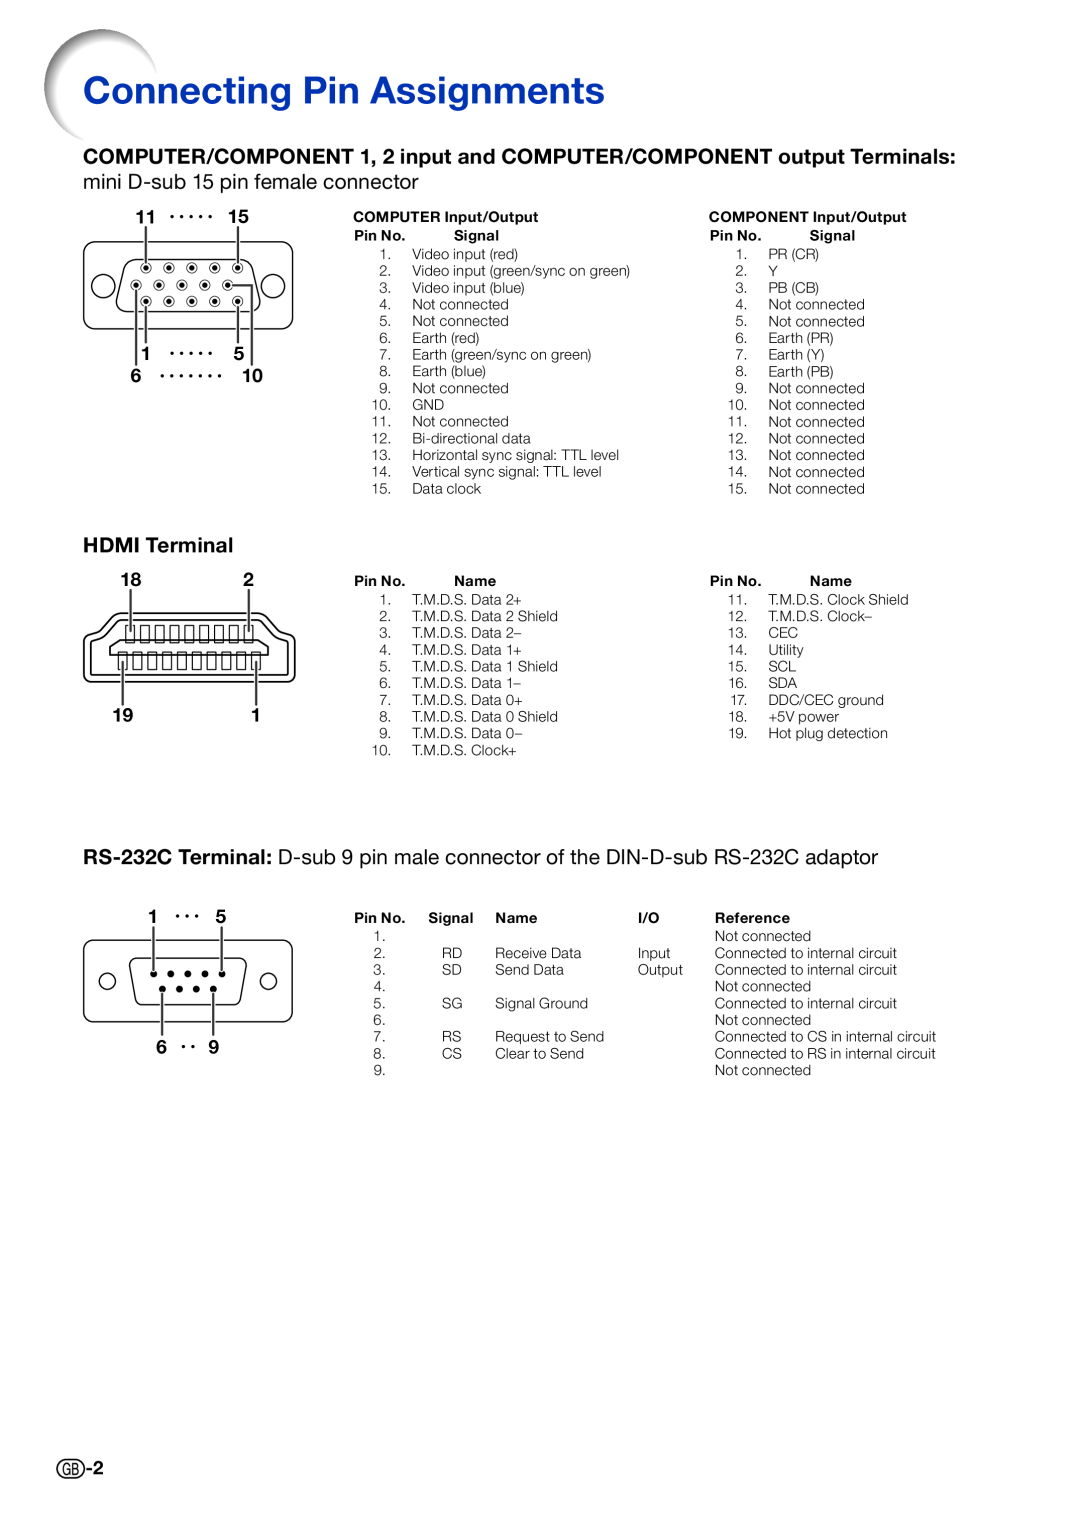 Sharp PGLX3000, PGLX3500 Connecting Pin Assignments, COMPUTER/COMPONENT 1, 2 input and COMPUTER/COMPONENT output Terminals 